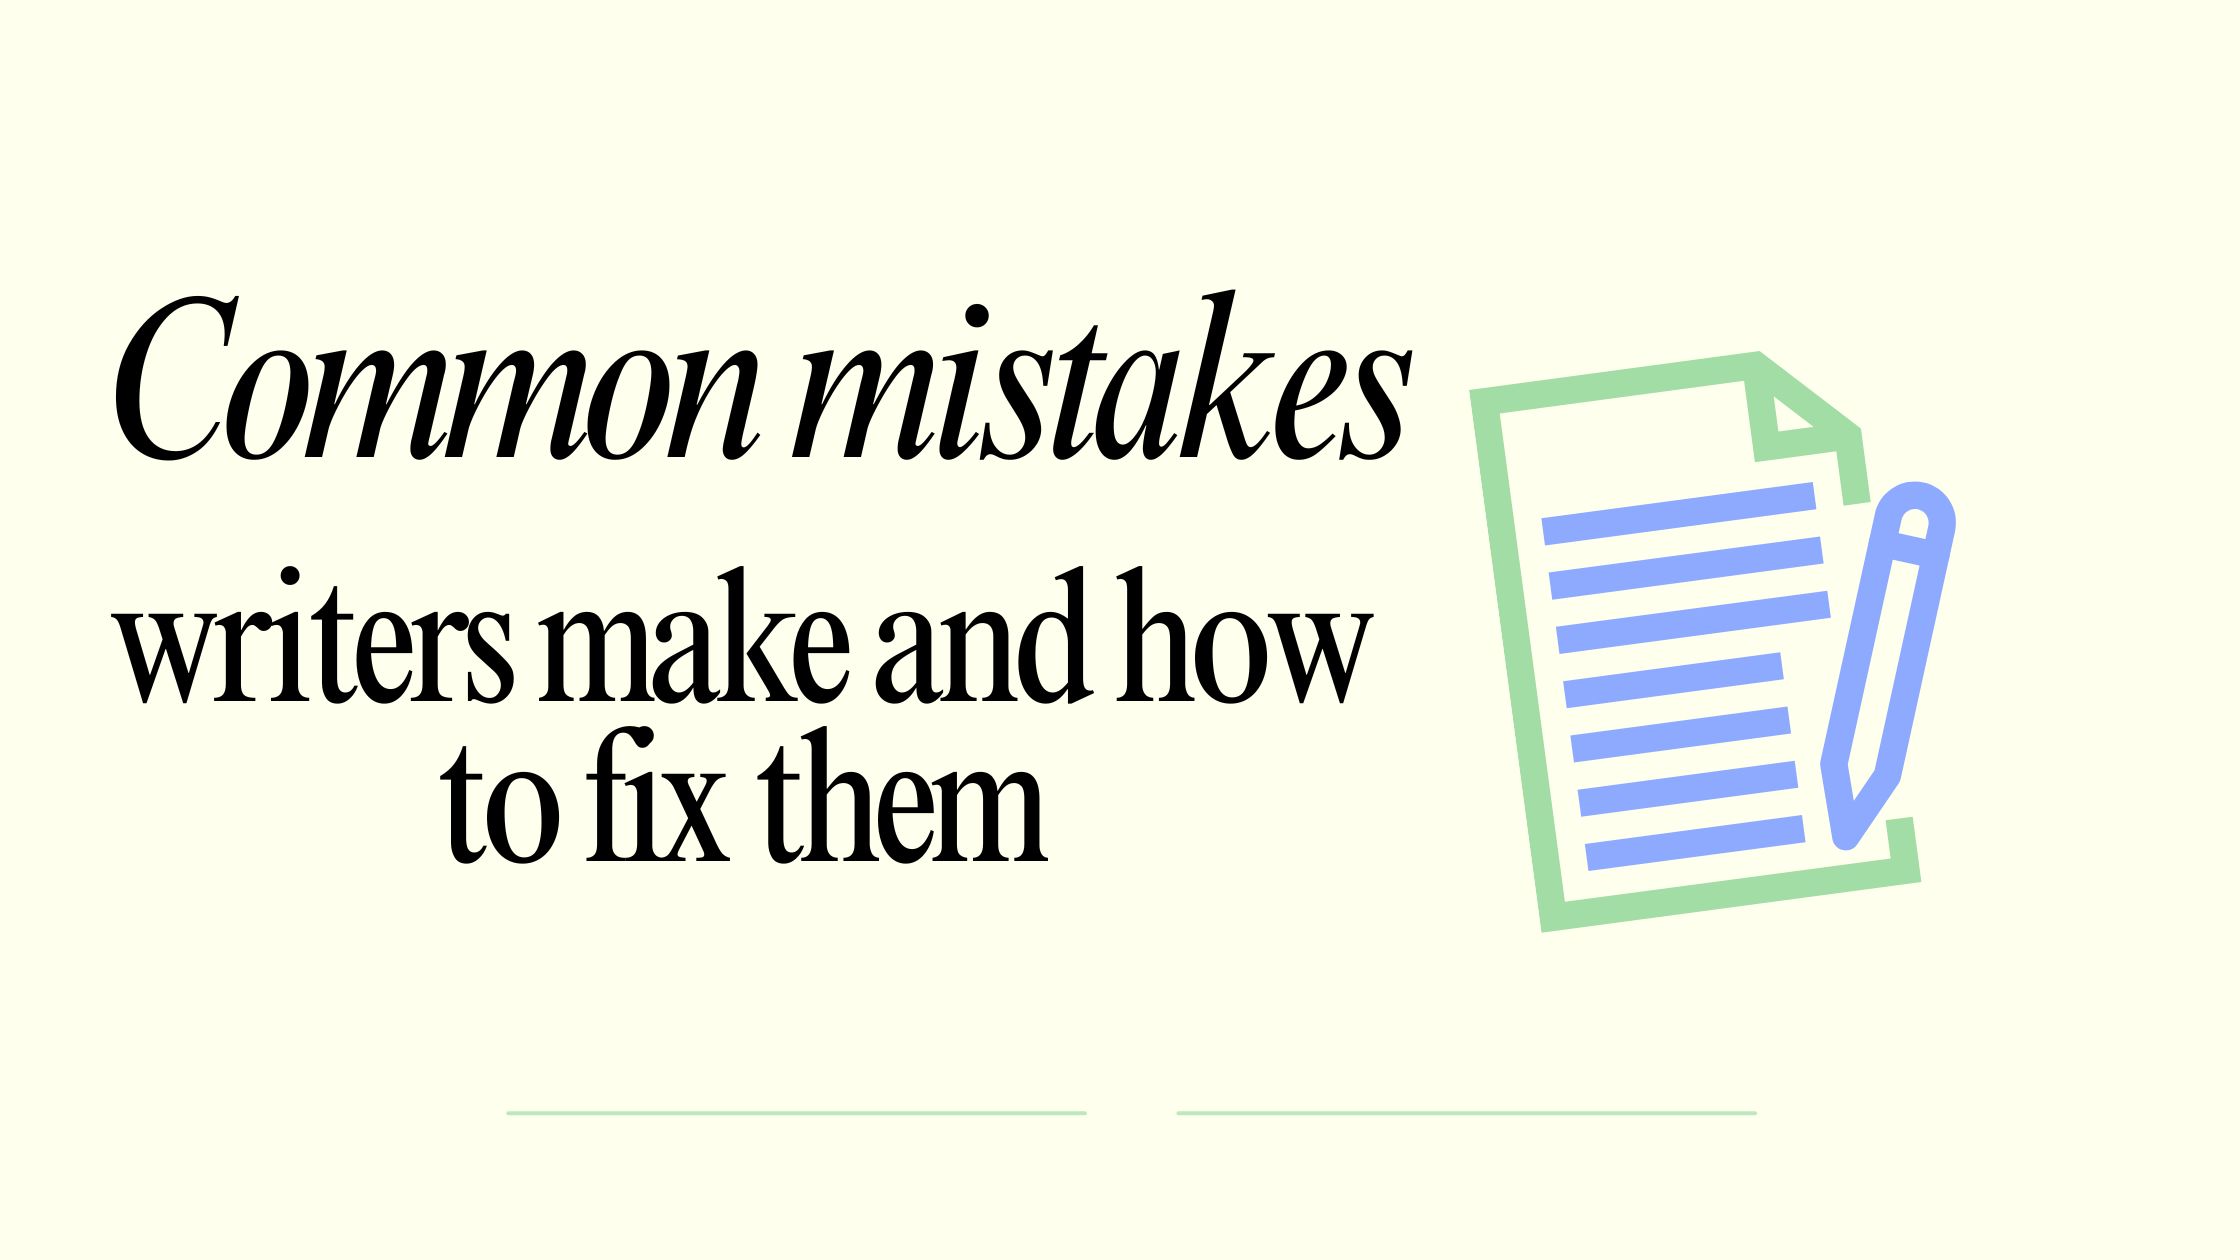 Common mistakes writers make and how to fix them